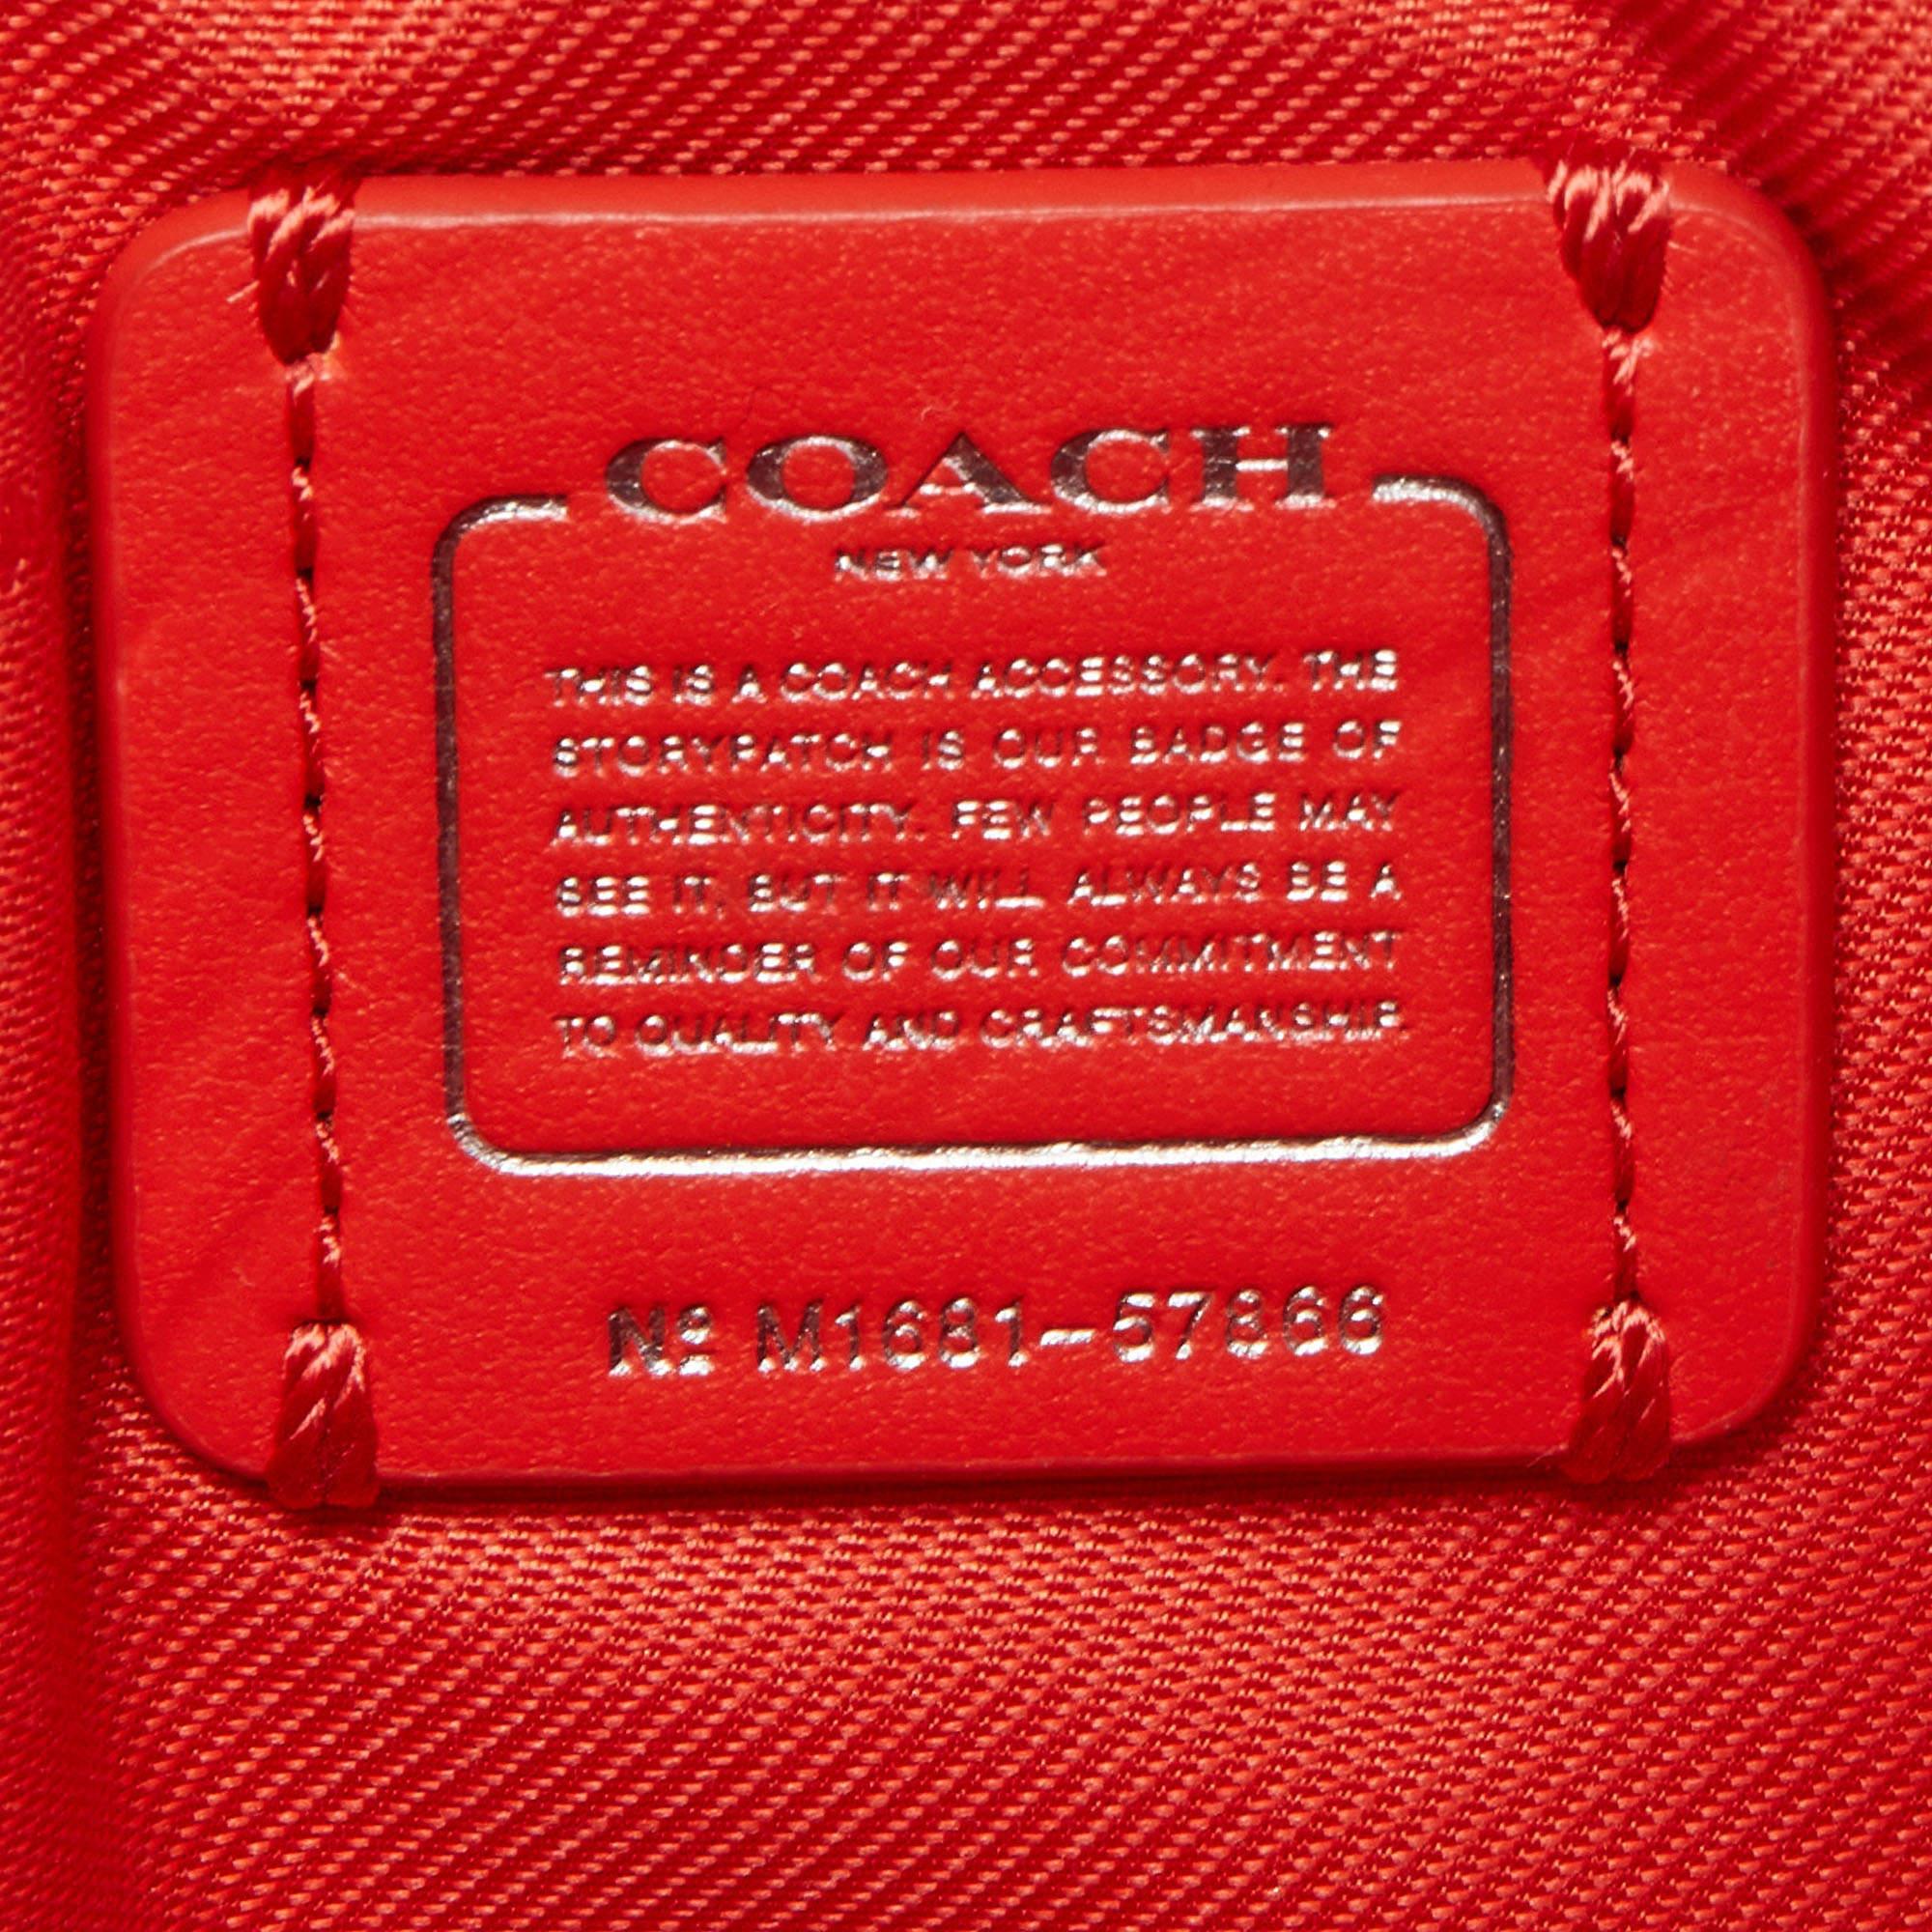 Coach Red Coral Leather Souvenir Embroidery Crossbody Clutch 7